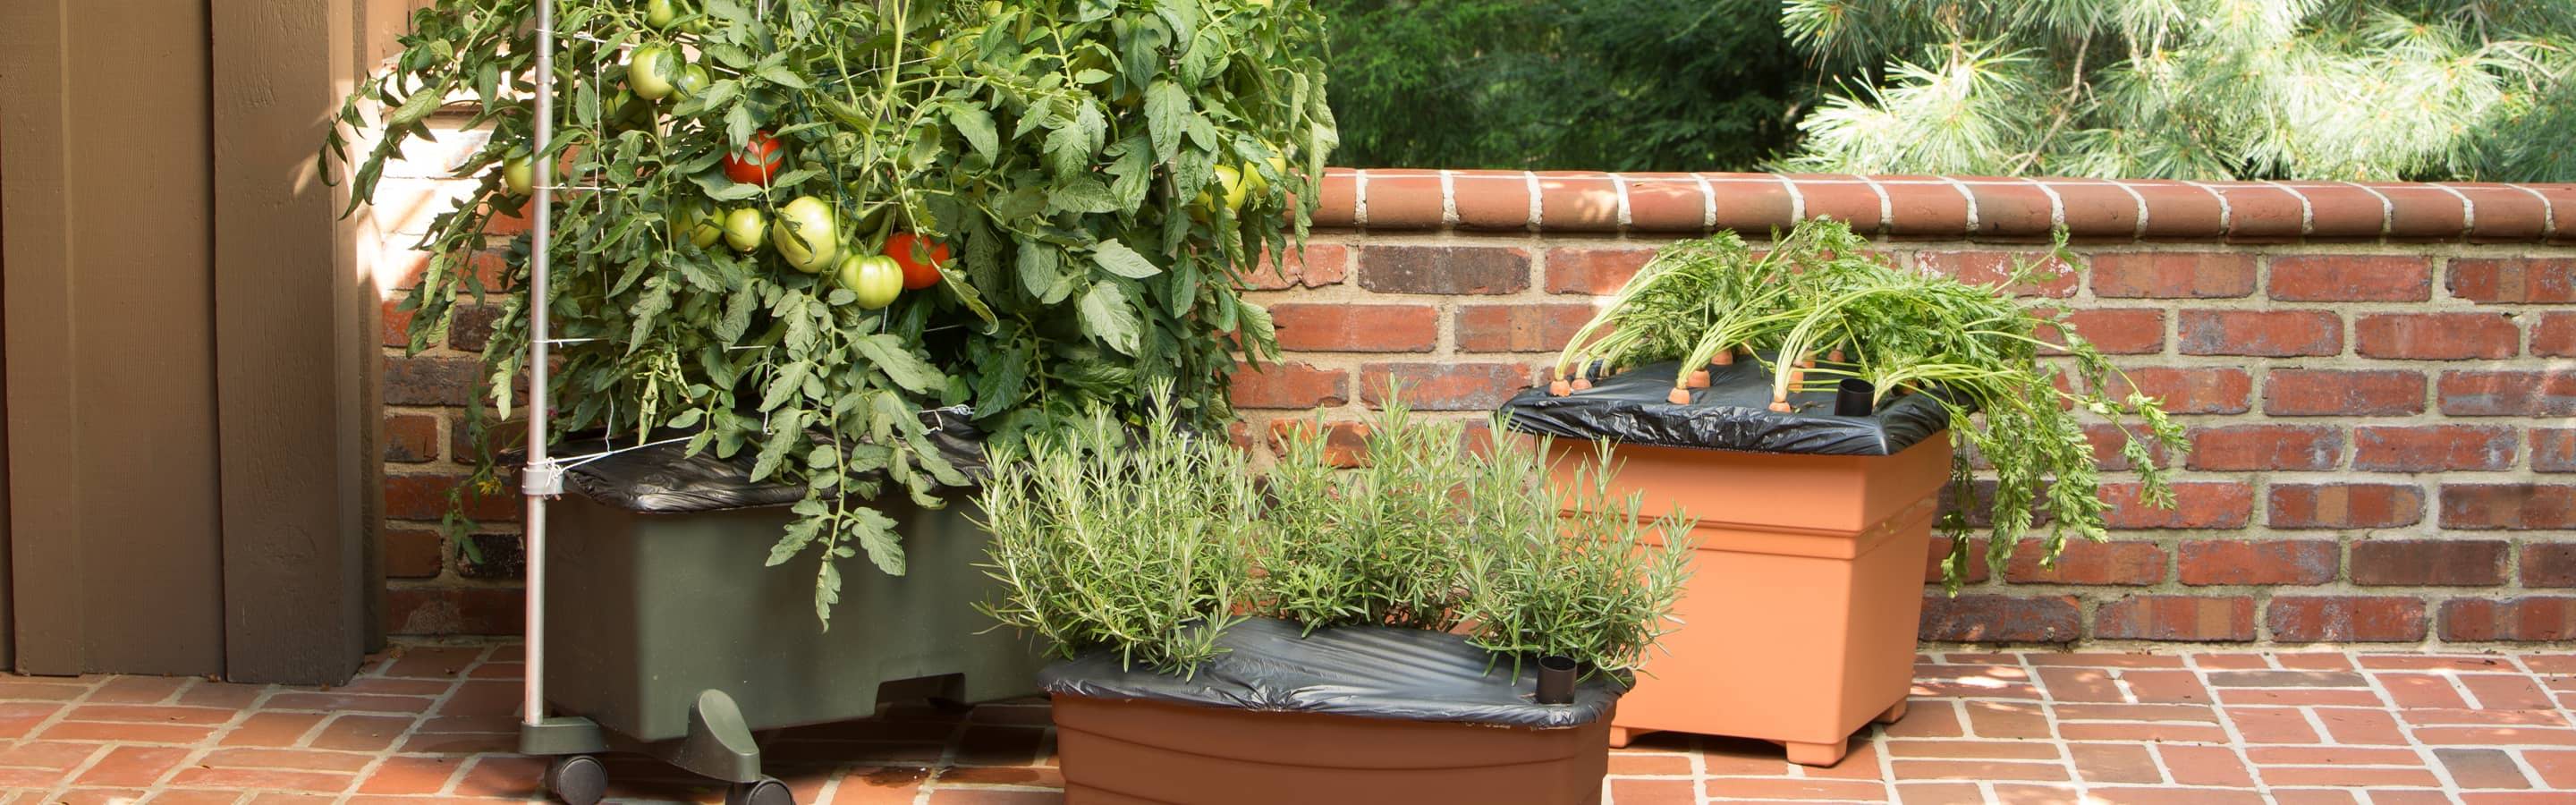 3 different sizes and styles of EarthBox planting boxes for container gardening